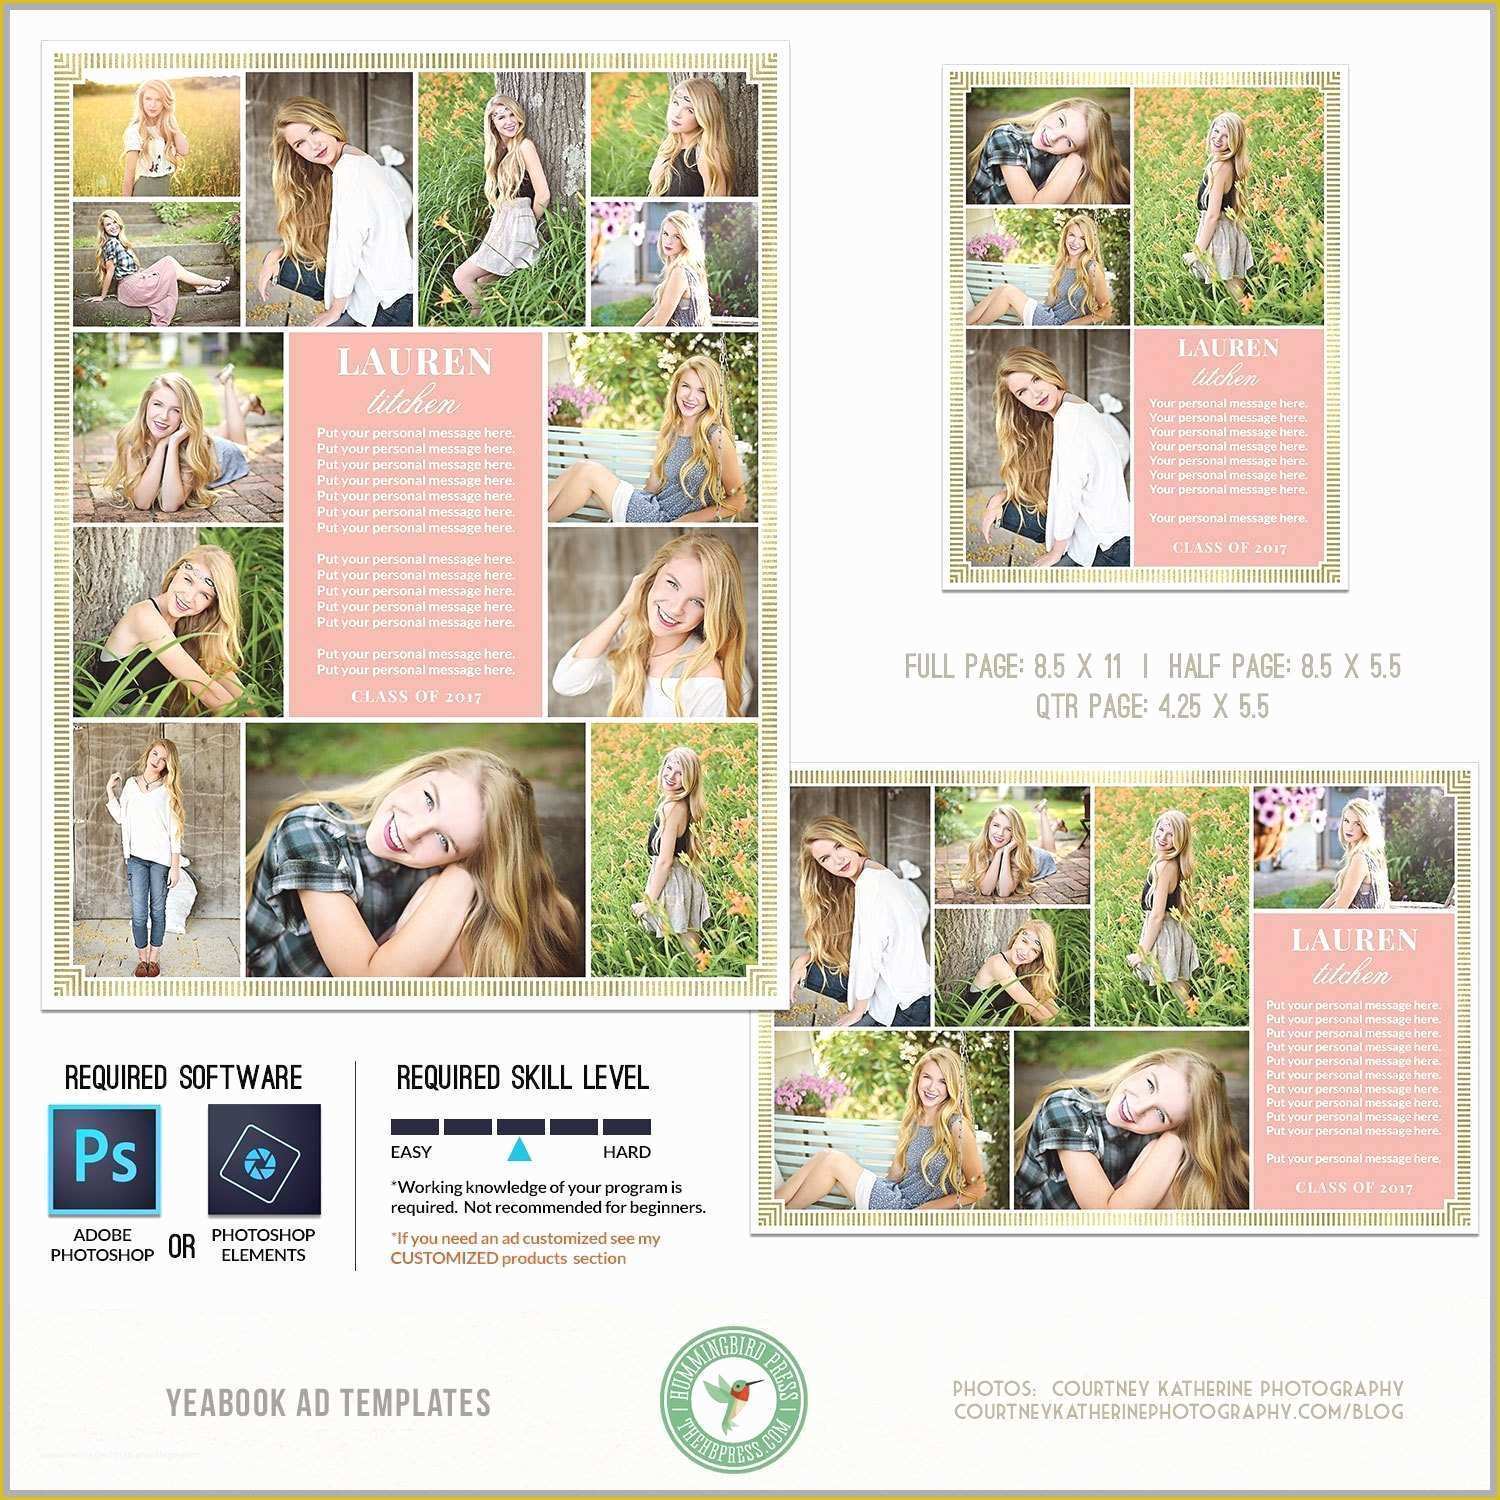 Yearbook Templates Free Download Of 63 Fresh Models Yearbook Templates